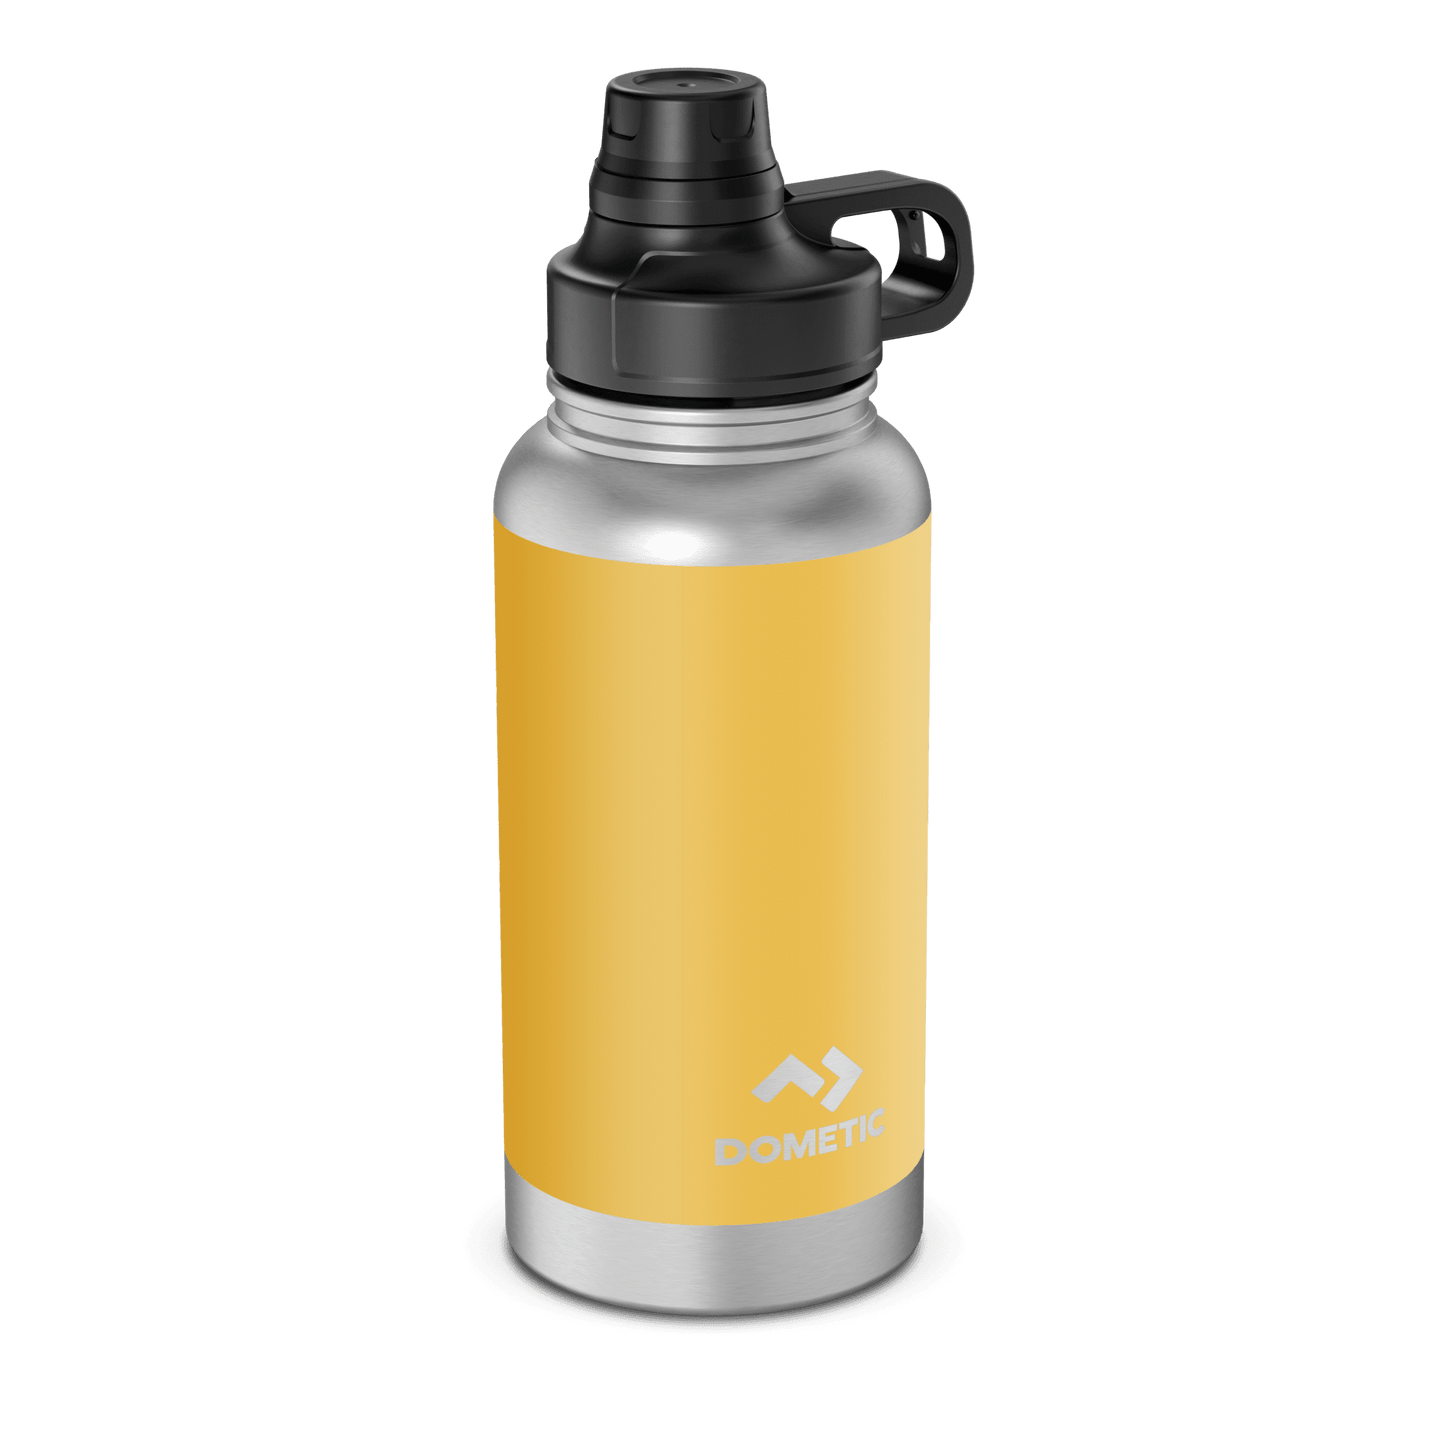 Dometic 900 ml Thermo Bottle - Glow